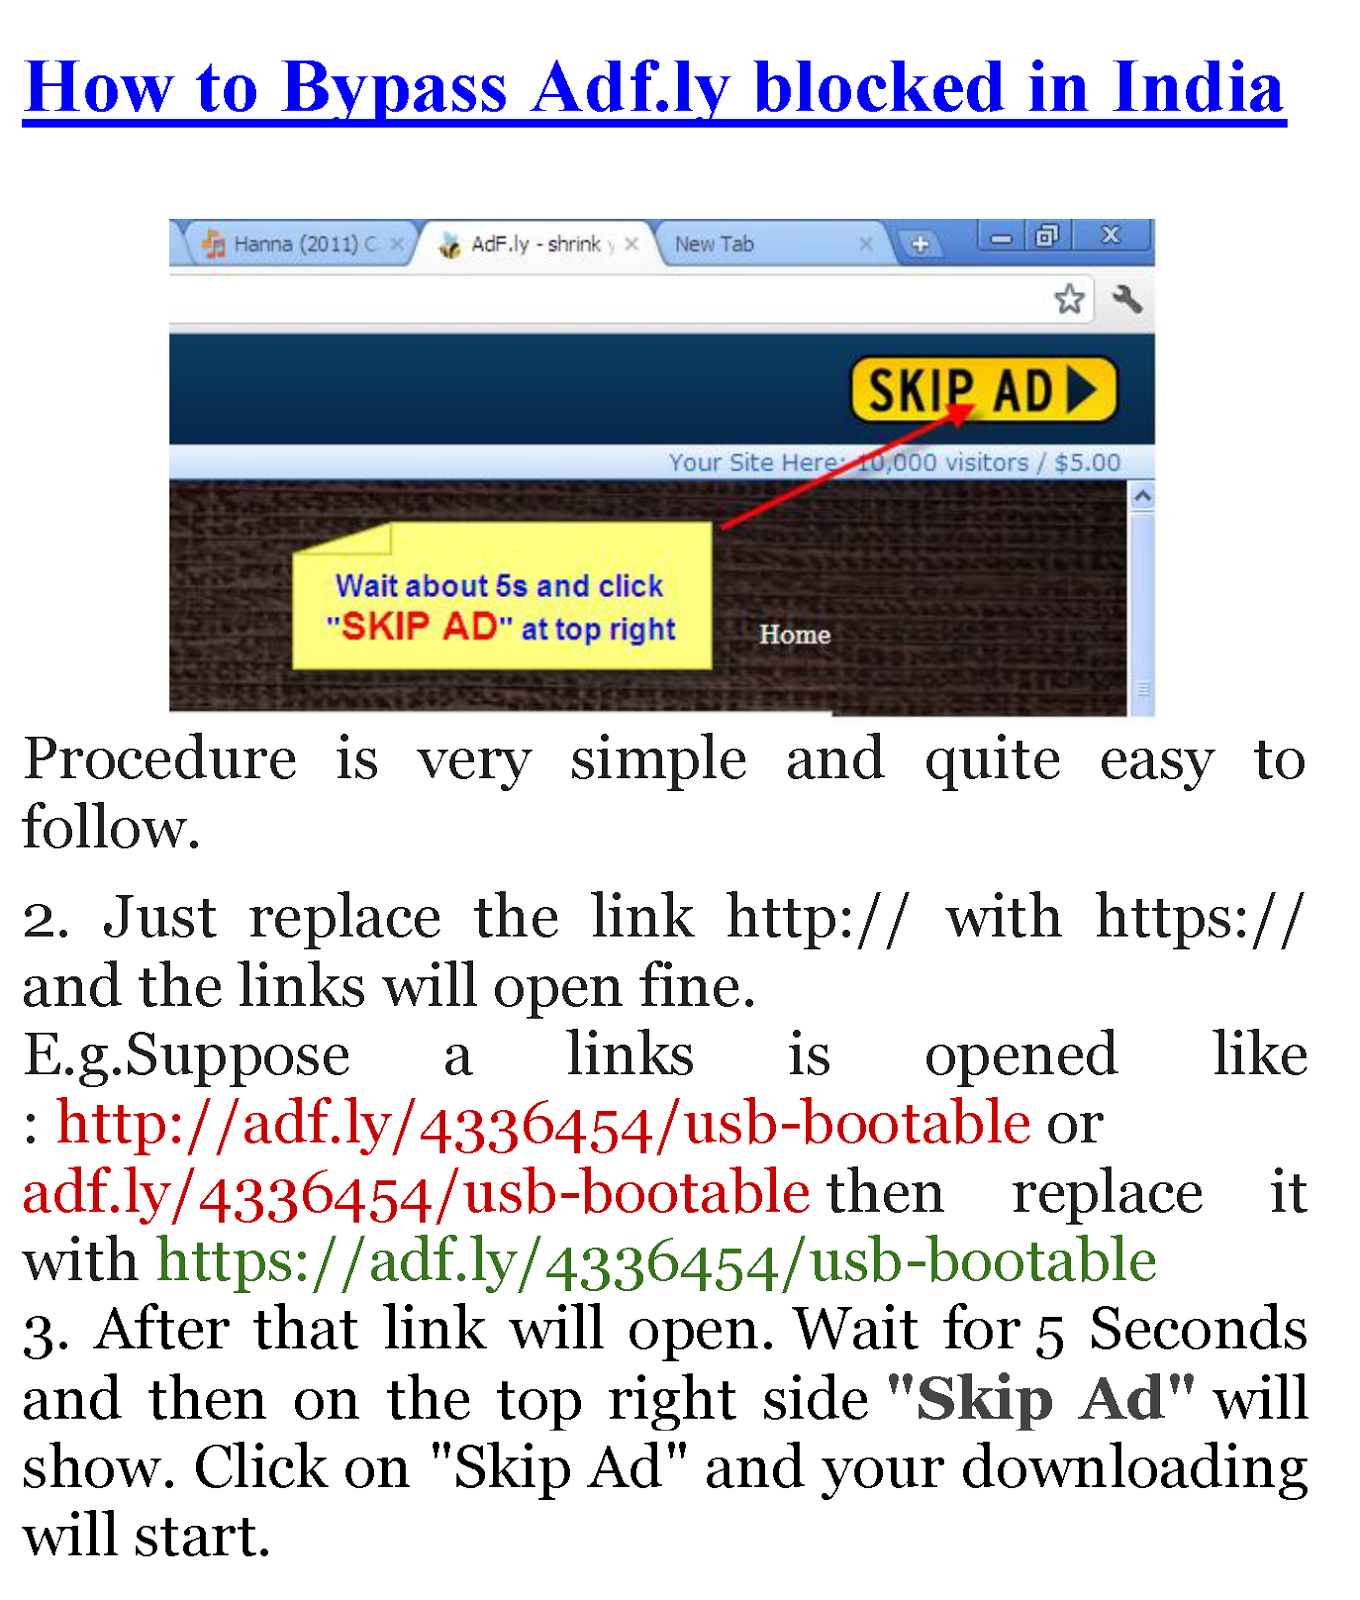 How to Open Adfly Blocked Link